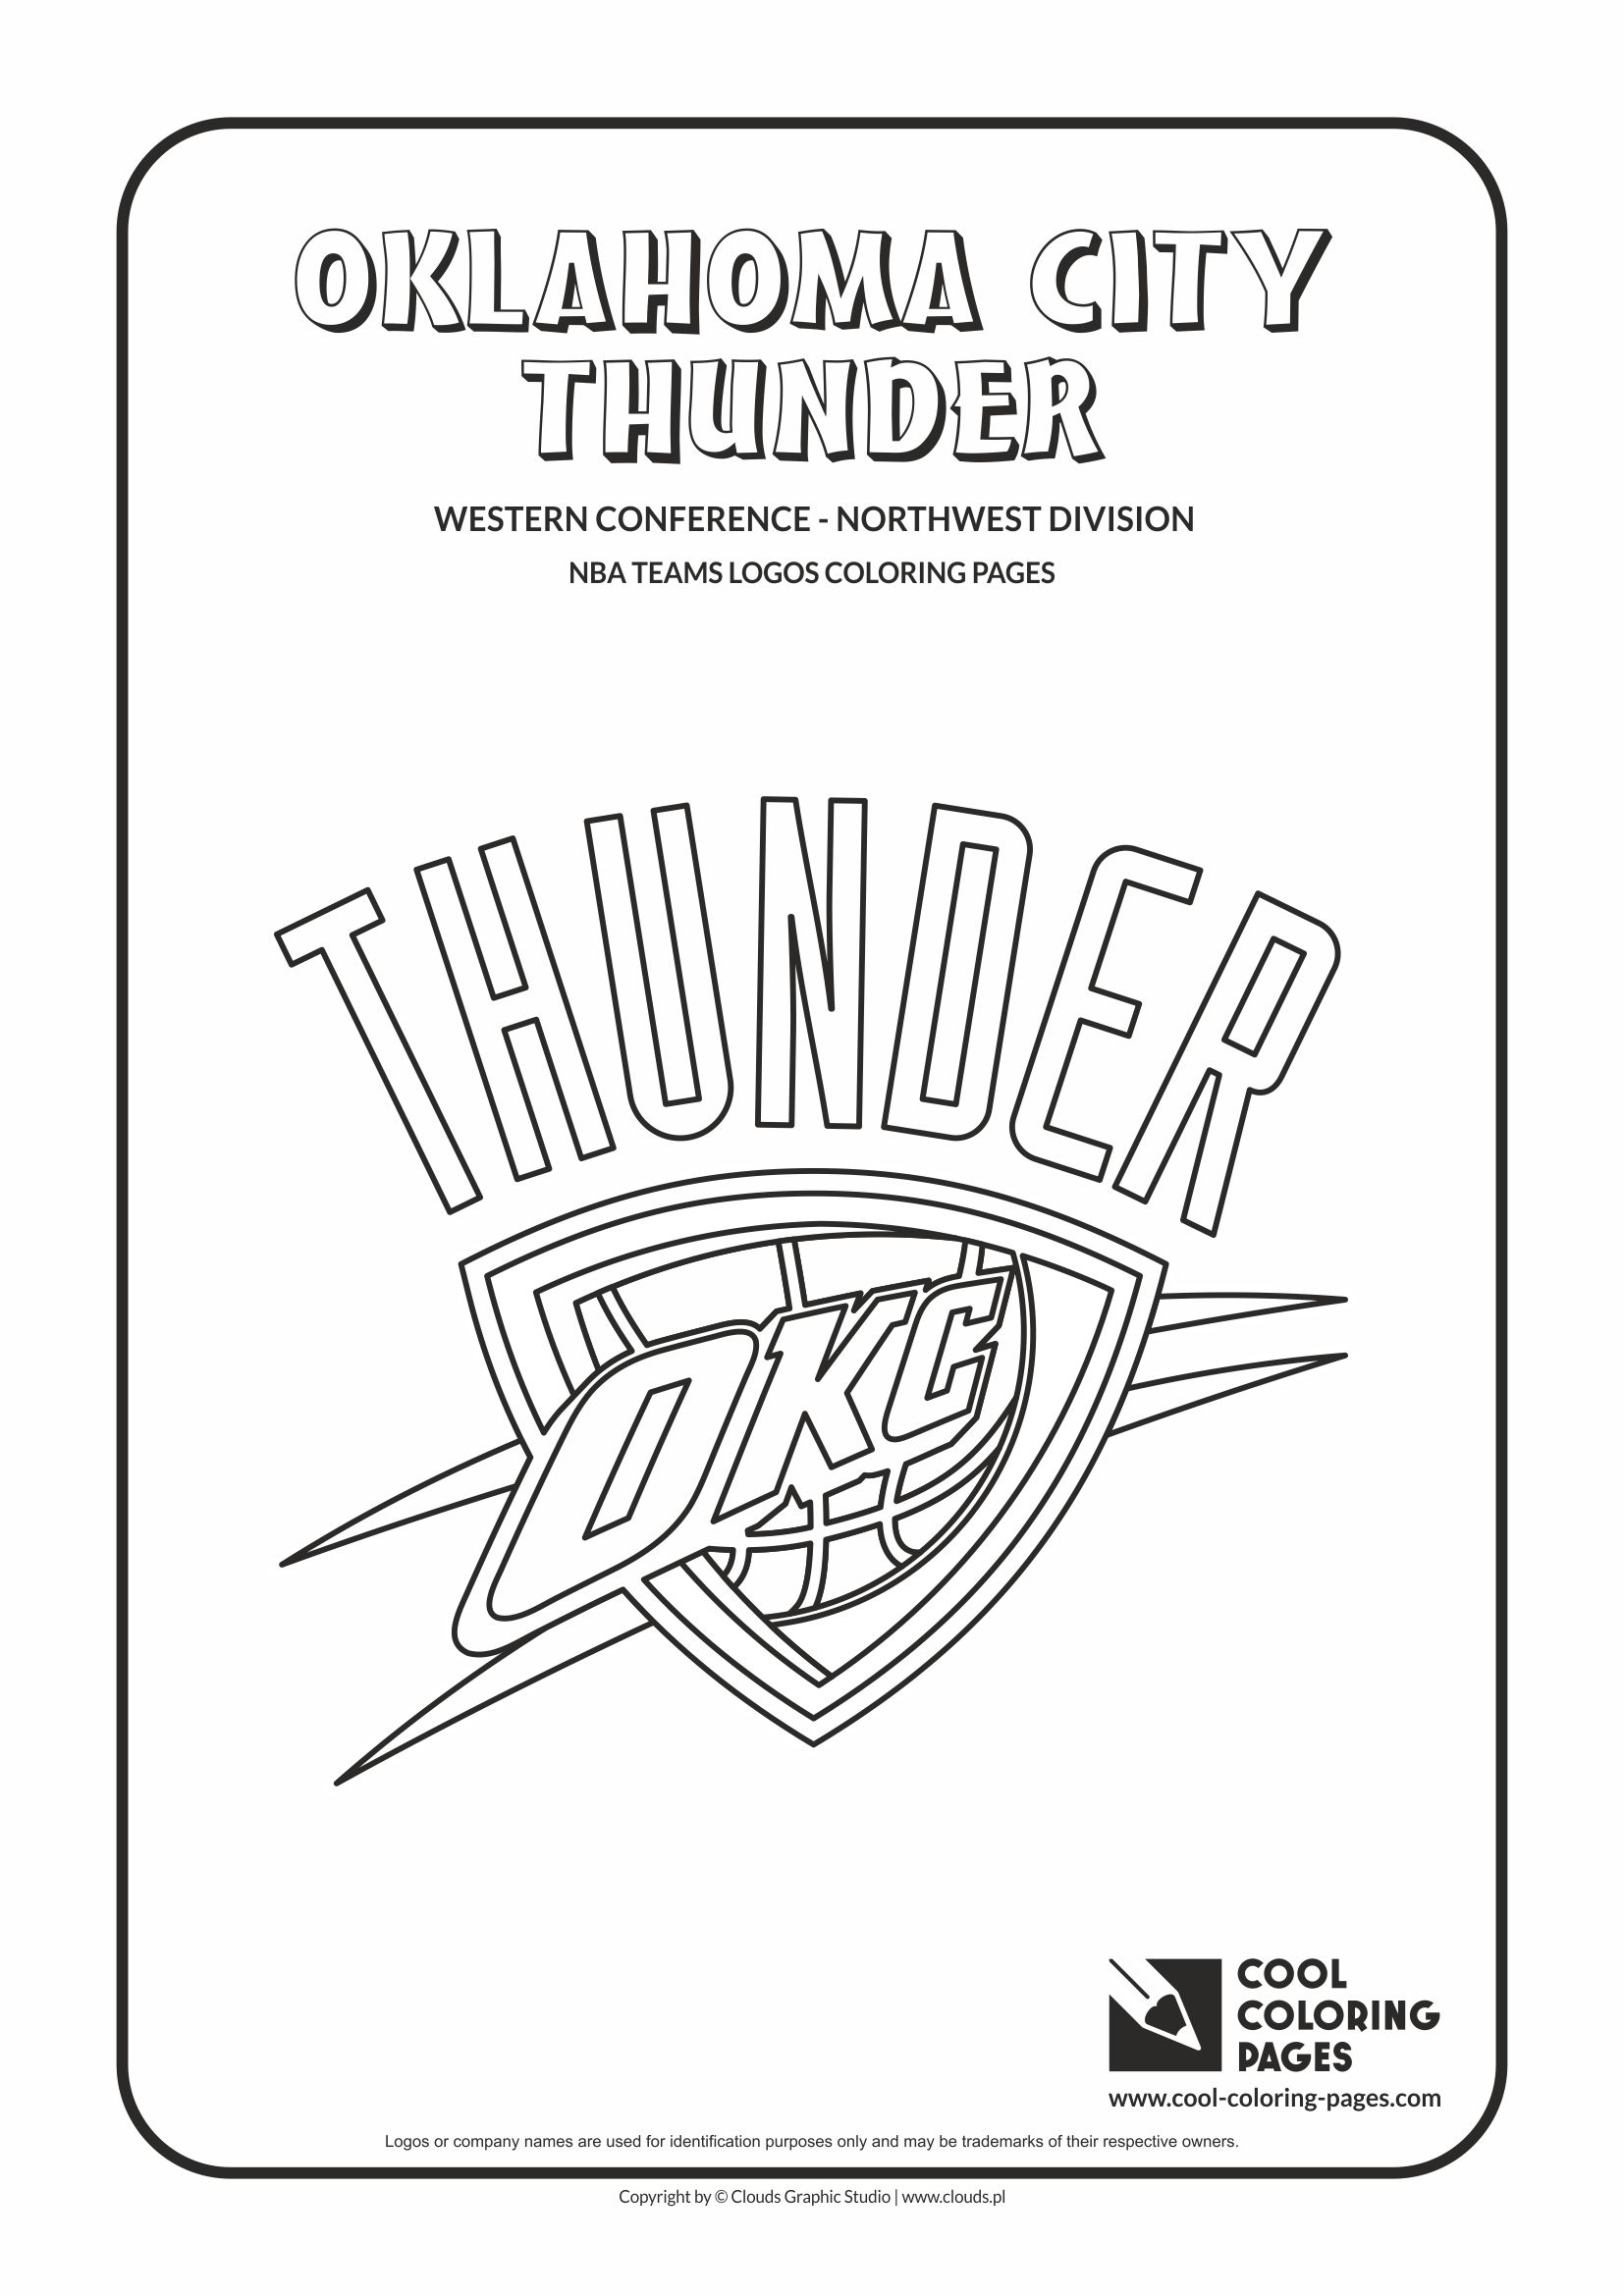 Cool Coloring Pages NBA teams logos coloring pages - Cool Coloring